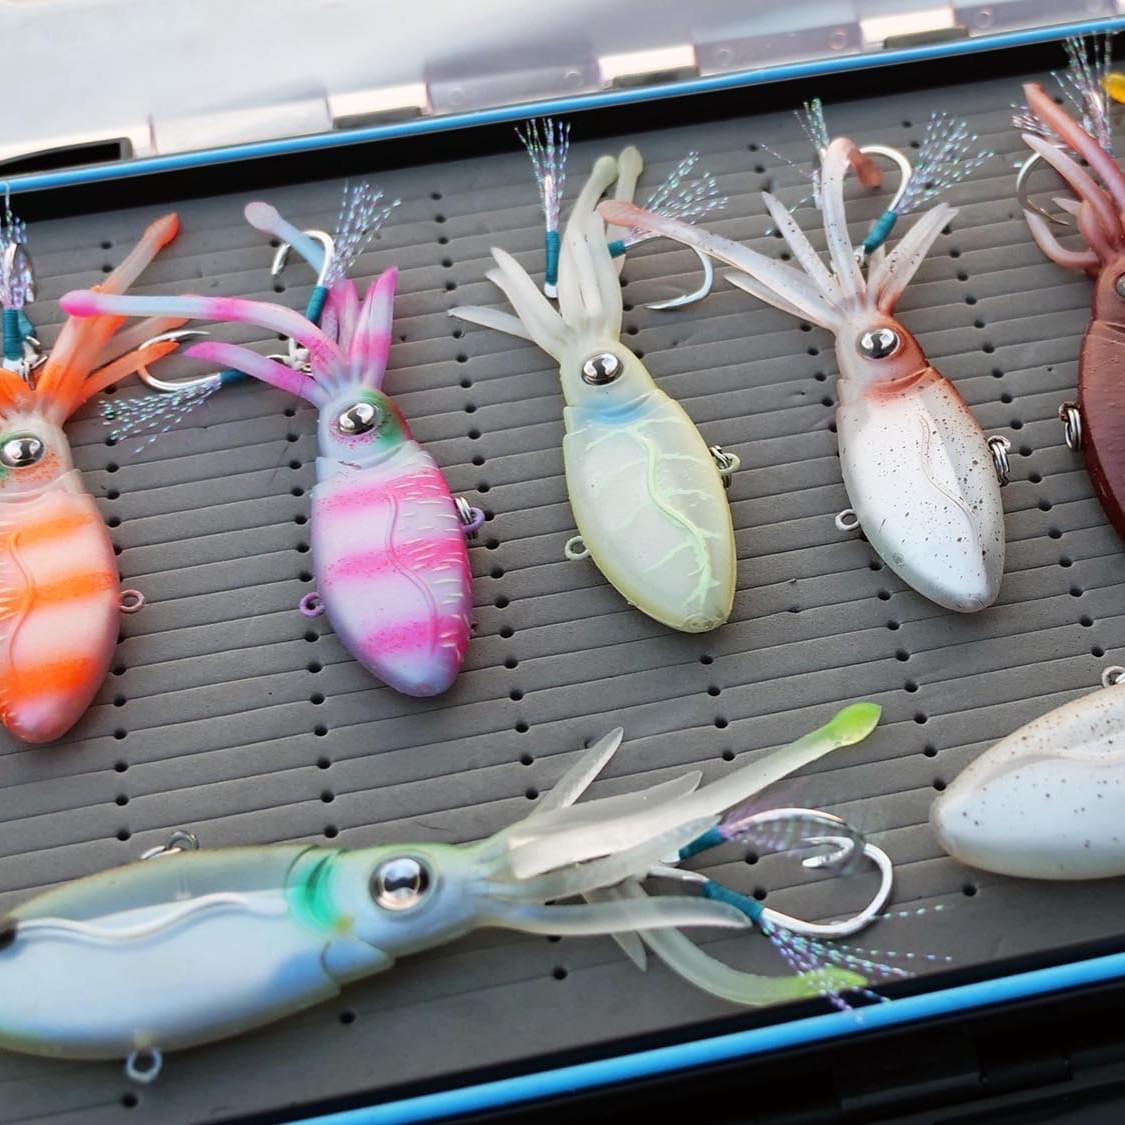 NOMAD SQUIDTREX 110 VIBE 110mm - 52G - Trolling lures